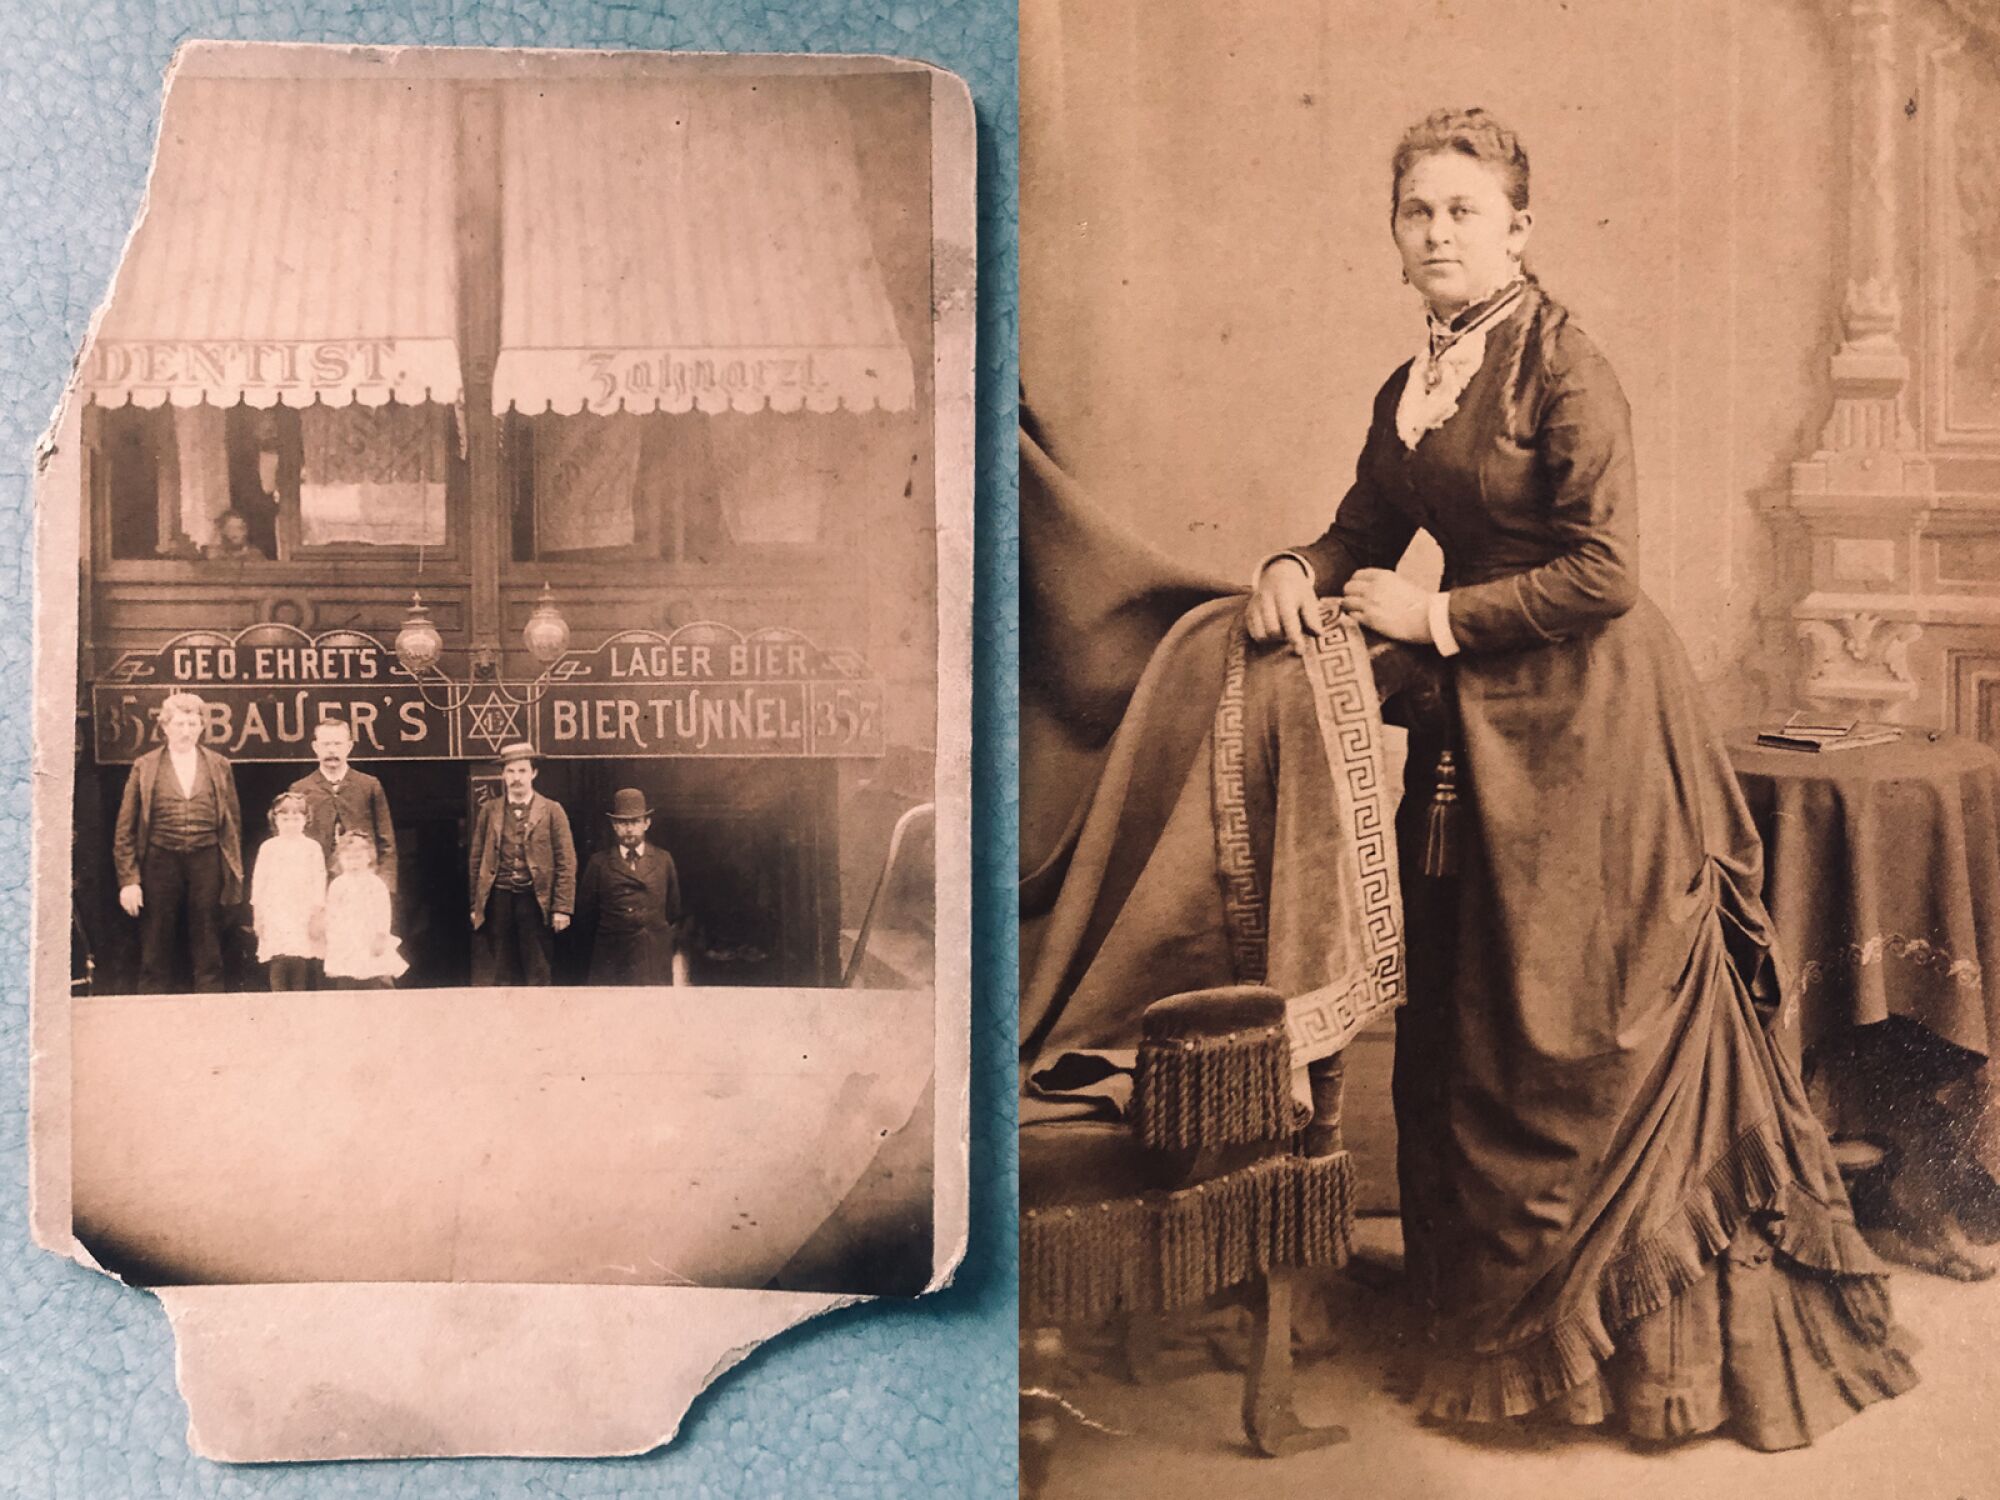 An old photo of people standing at a storefront, left, and an old photo of a woman 